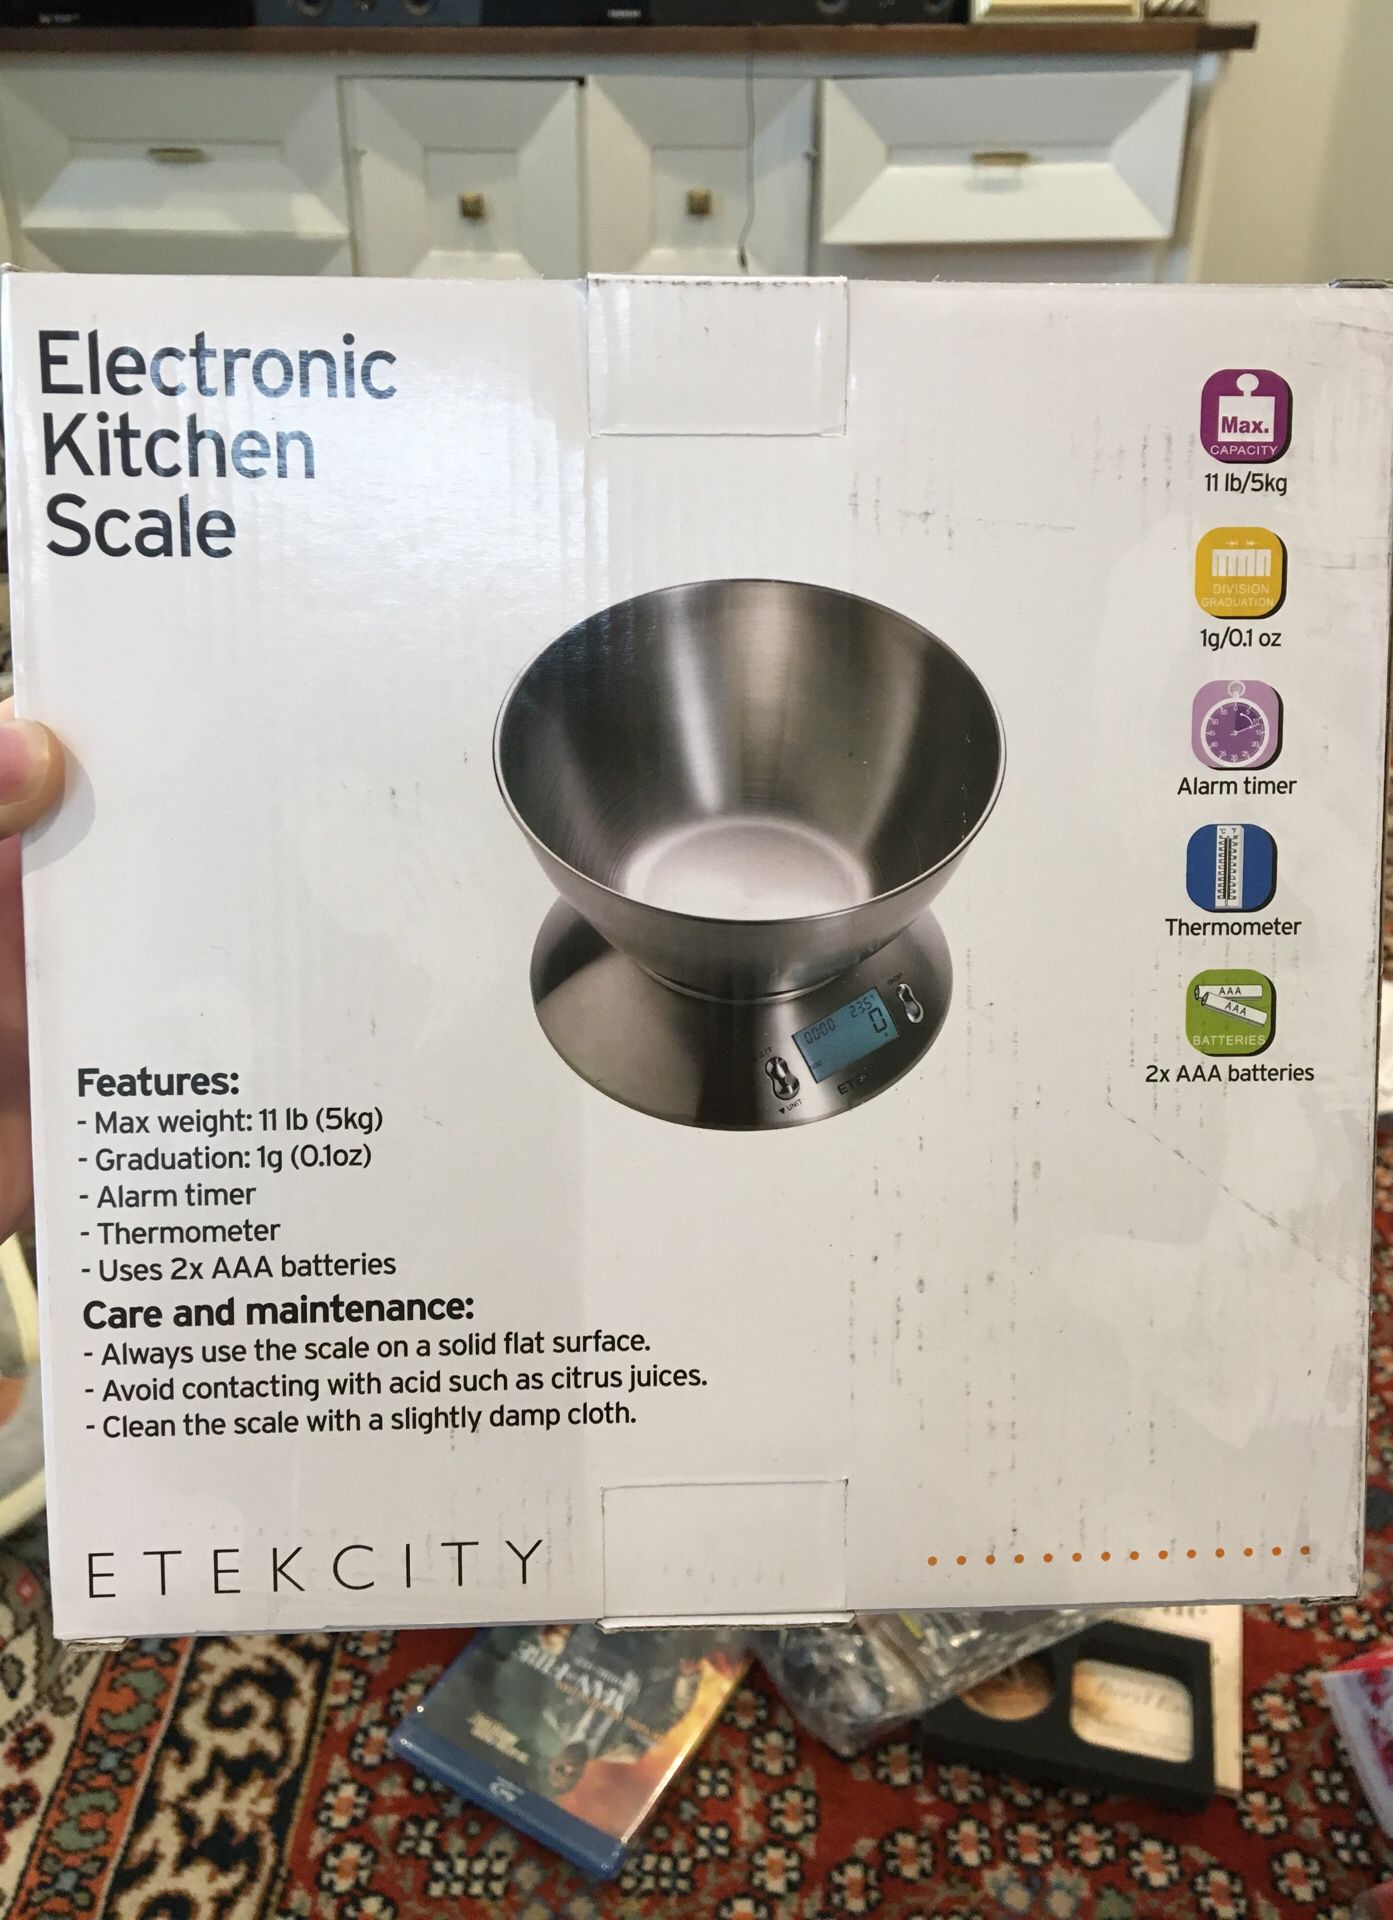 Etekcity kitchen scale with thermometer and alarm timer